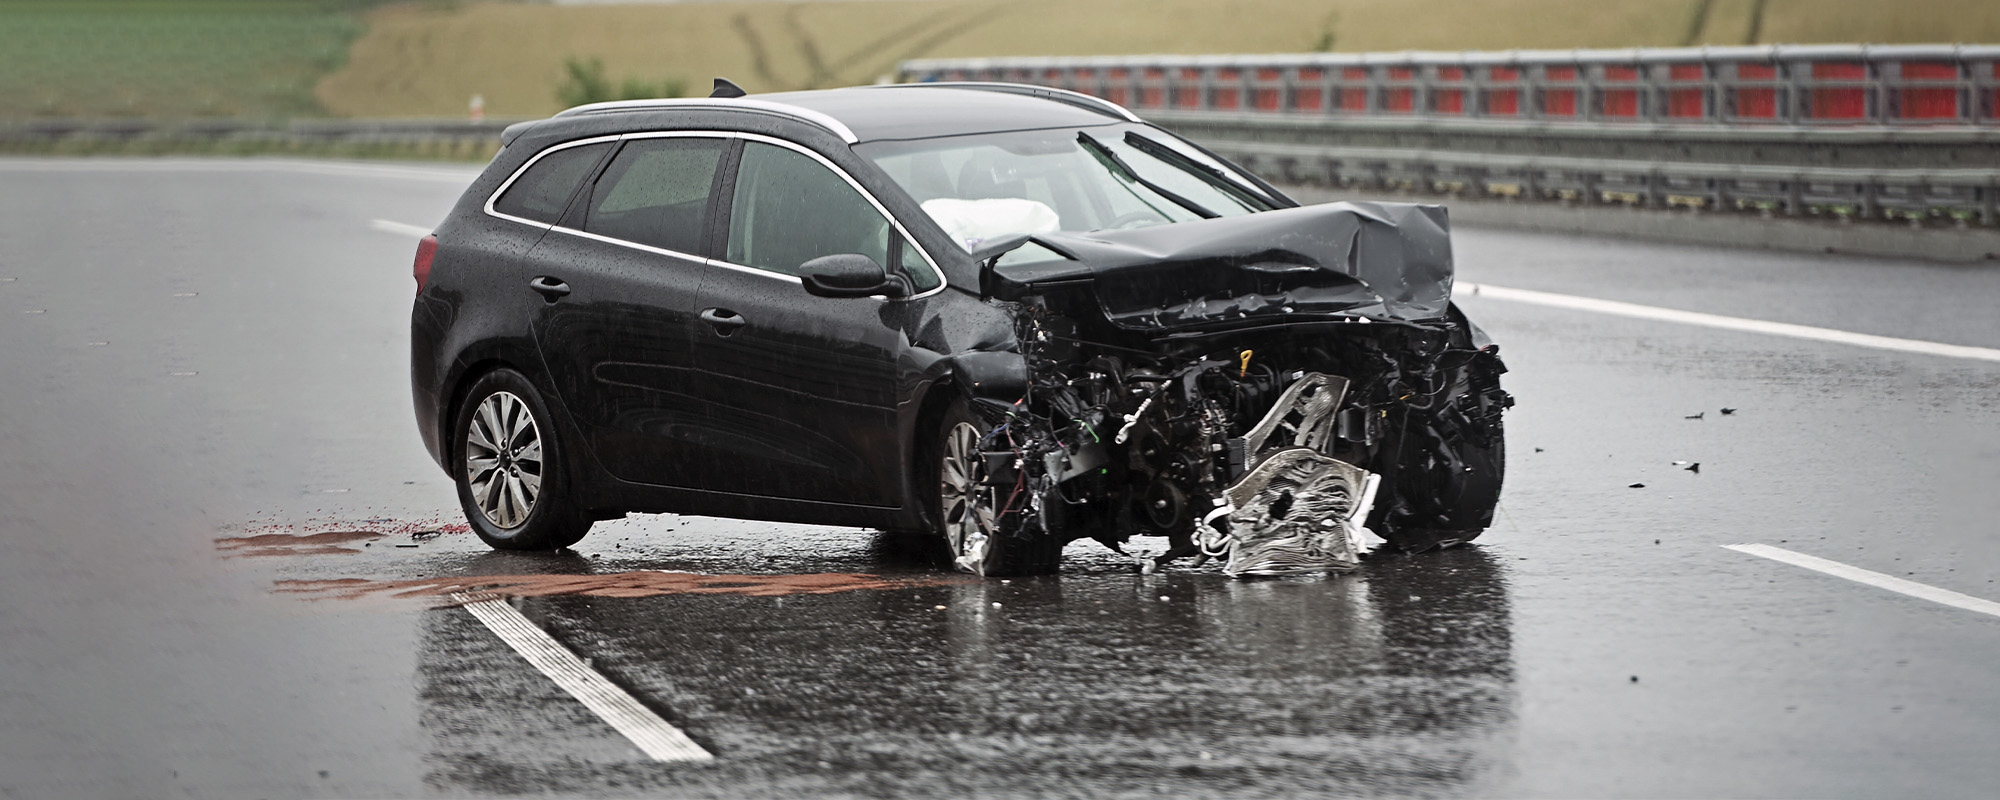 badly damaged front of a car on a highway right after head on barrier collision in heavy rain. rainy weather dangerous d